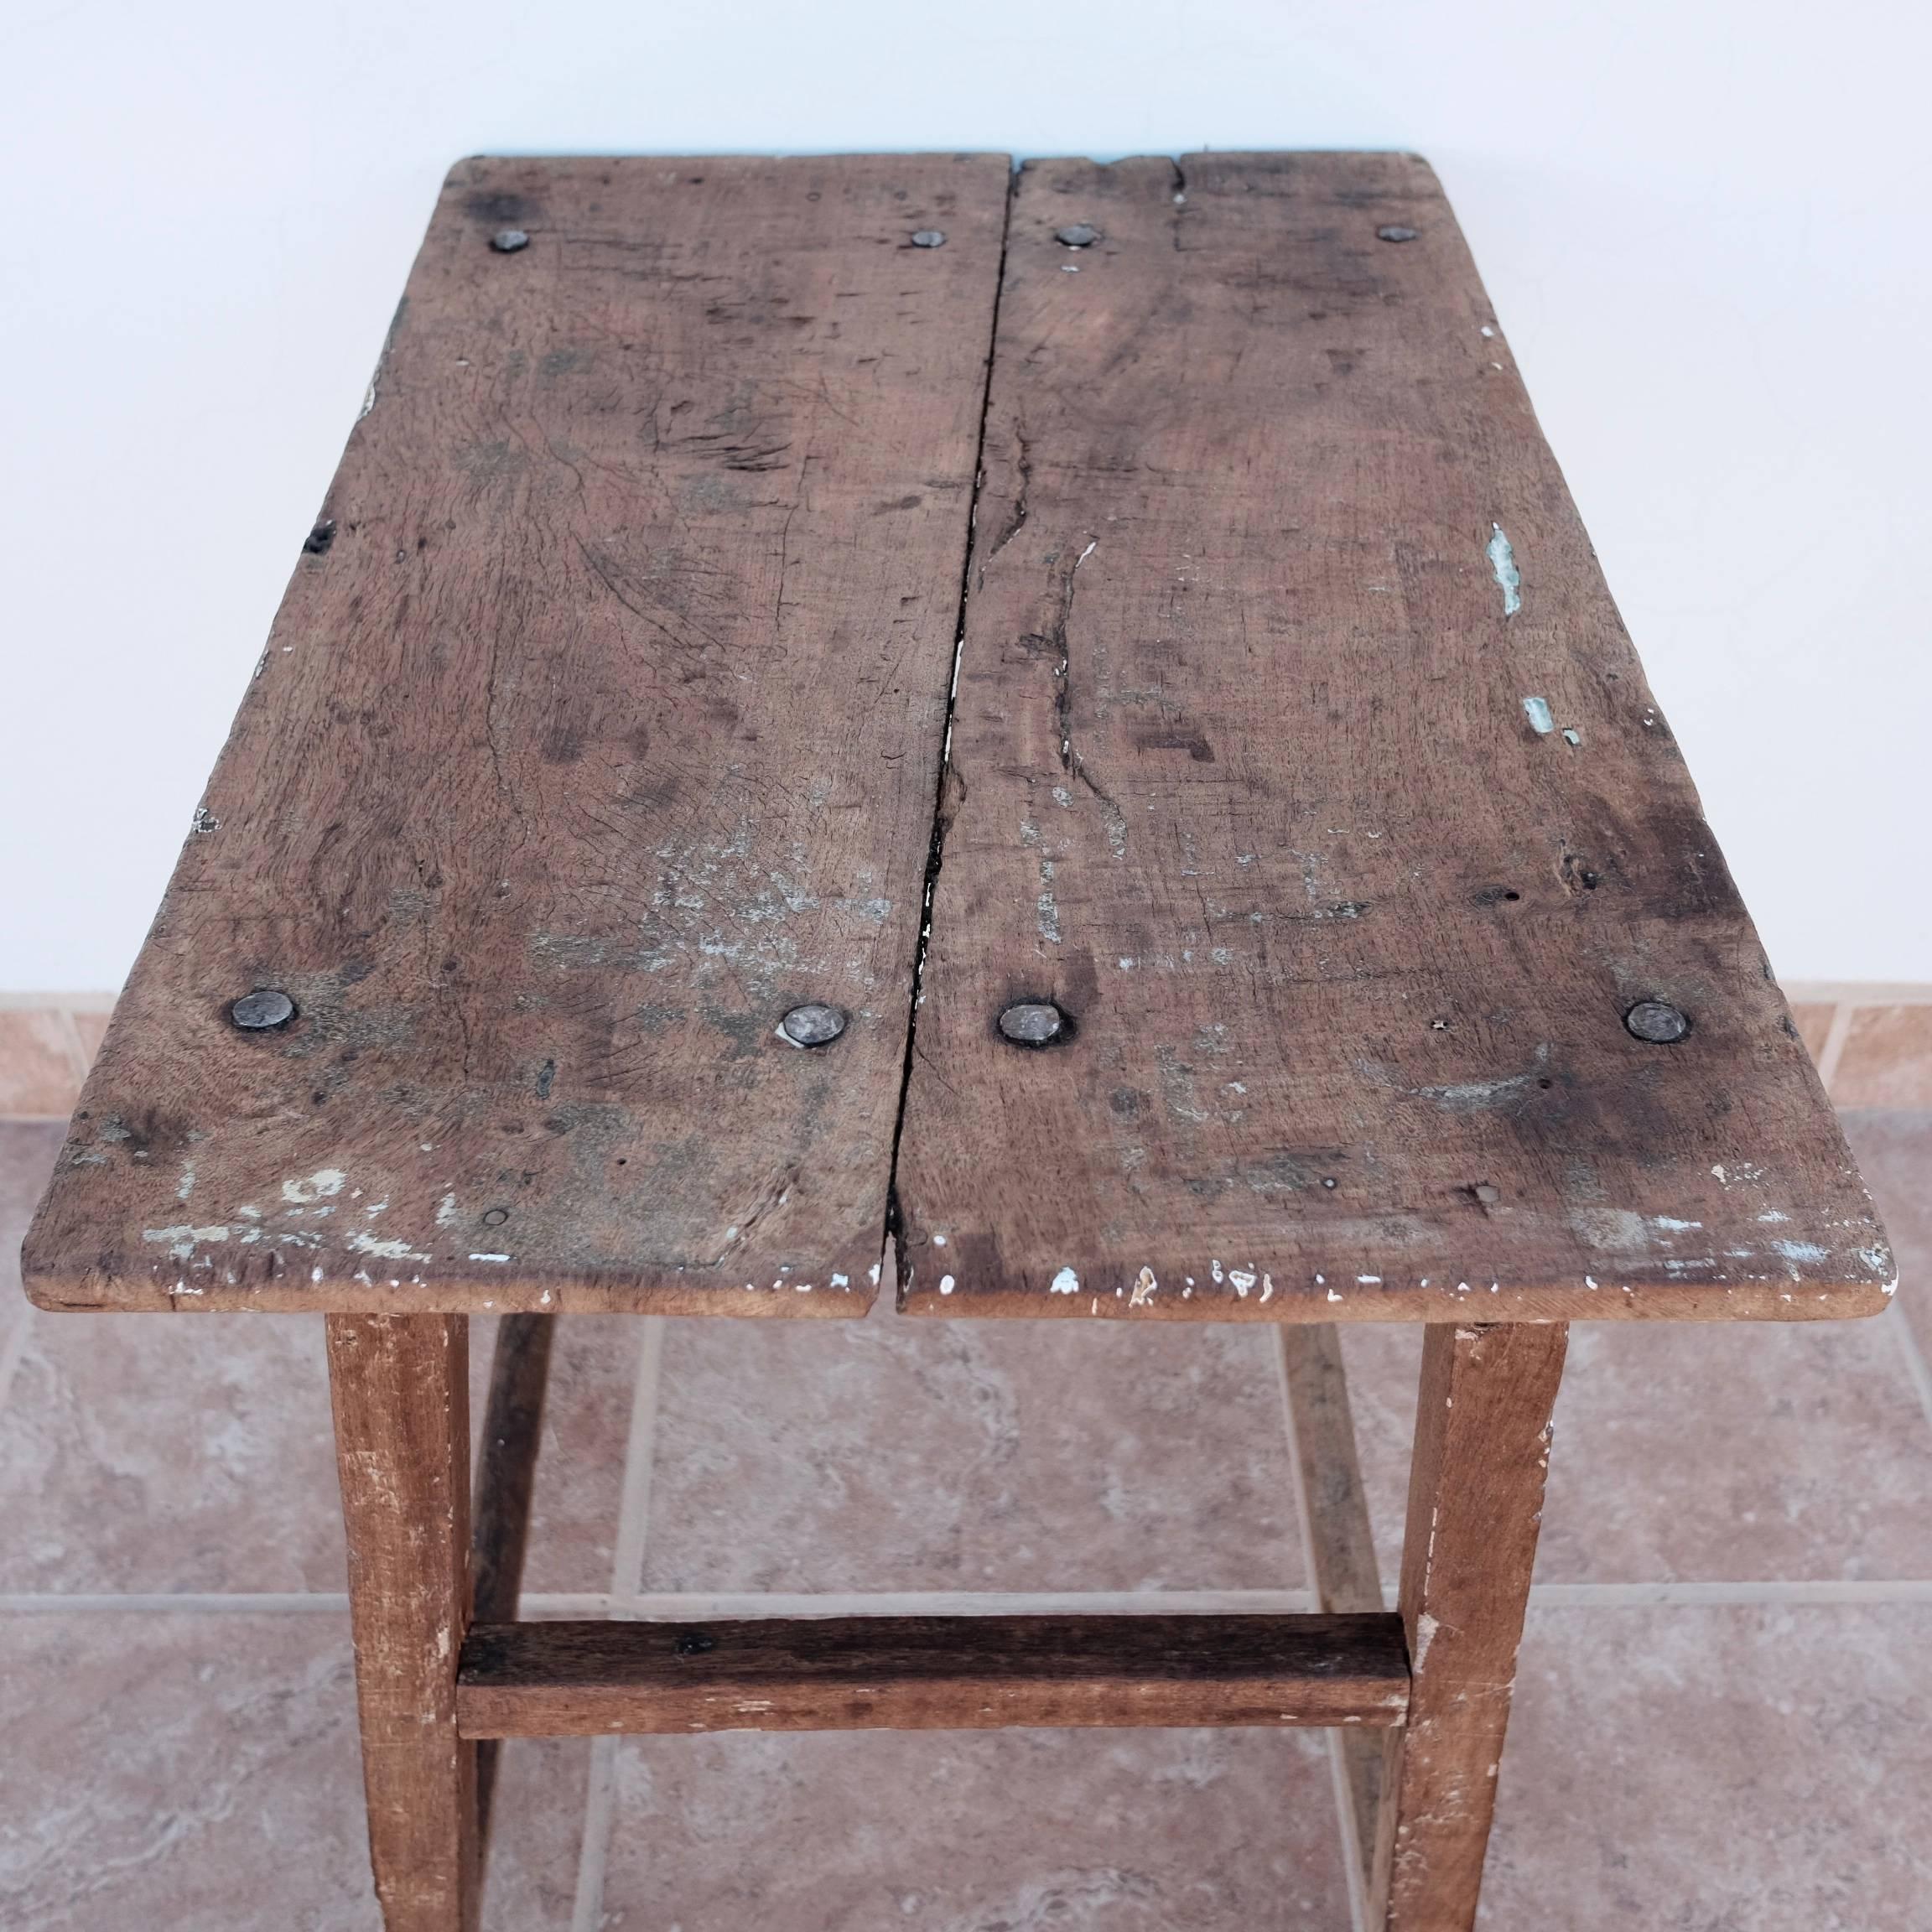 Rare, colonial era mesquite hardwood console table with original hardware and peg assembly in its original state. Tabletop is composed of two planks cut in an interesting diagonal fashion. Rustic tabletop contains bits of paint or plaster that have